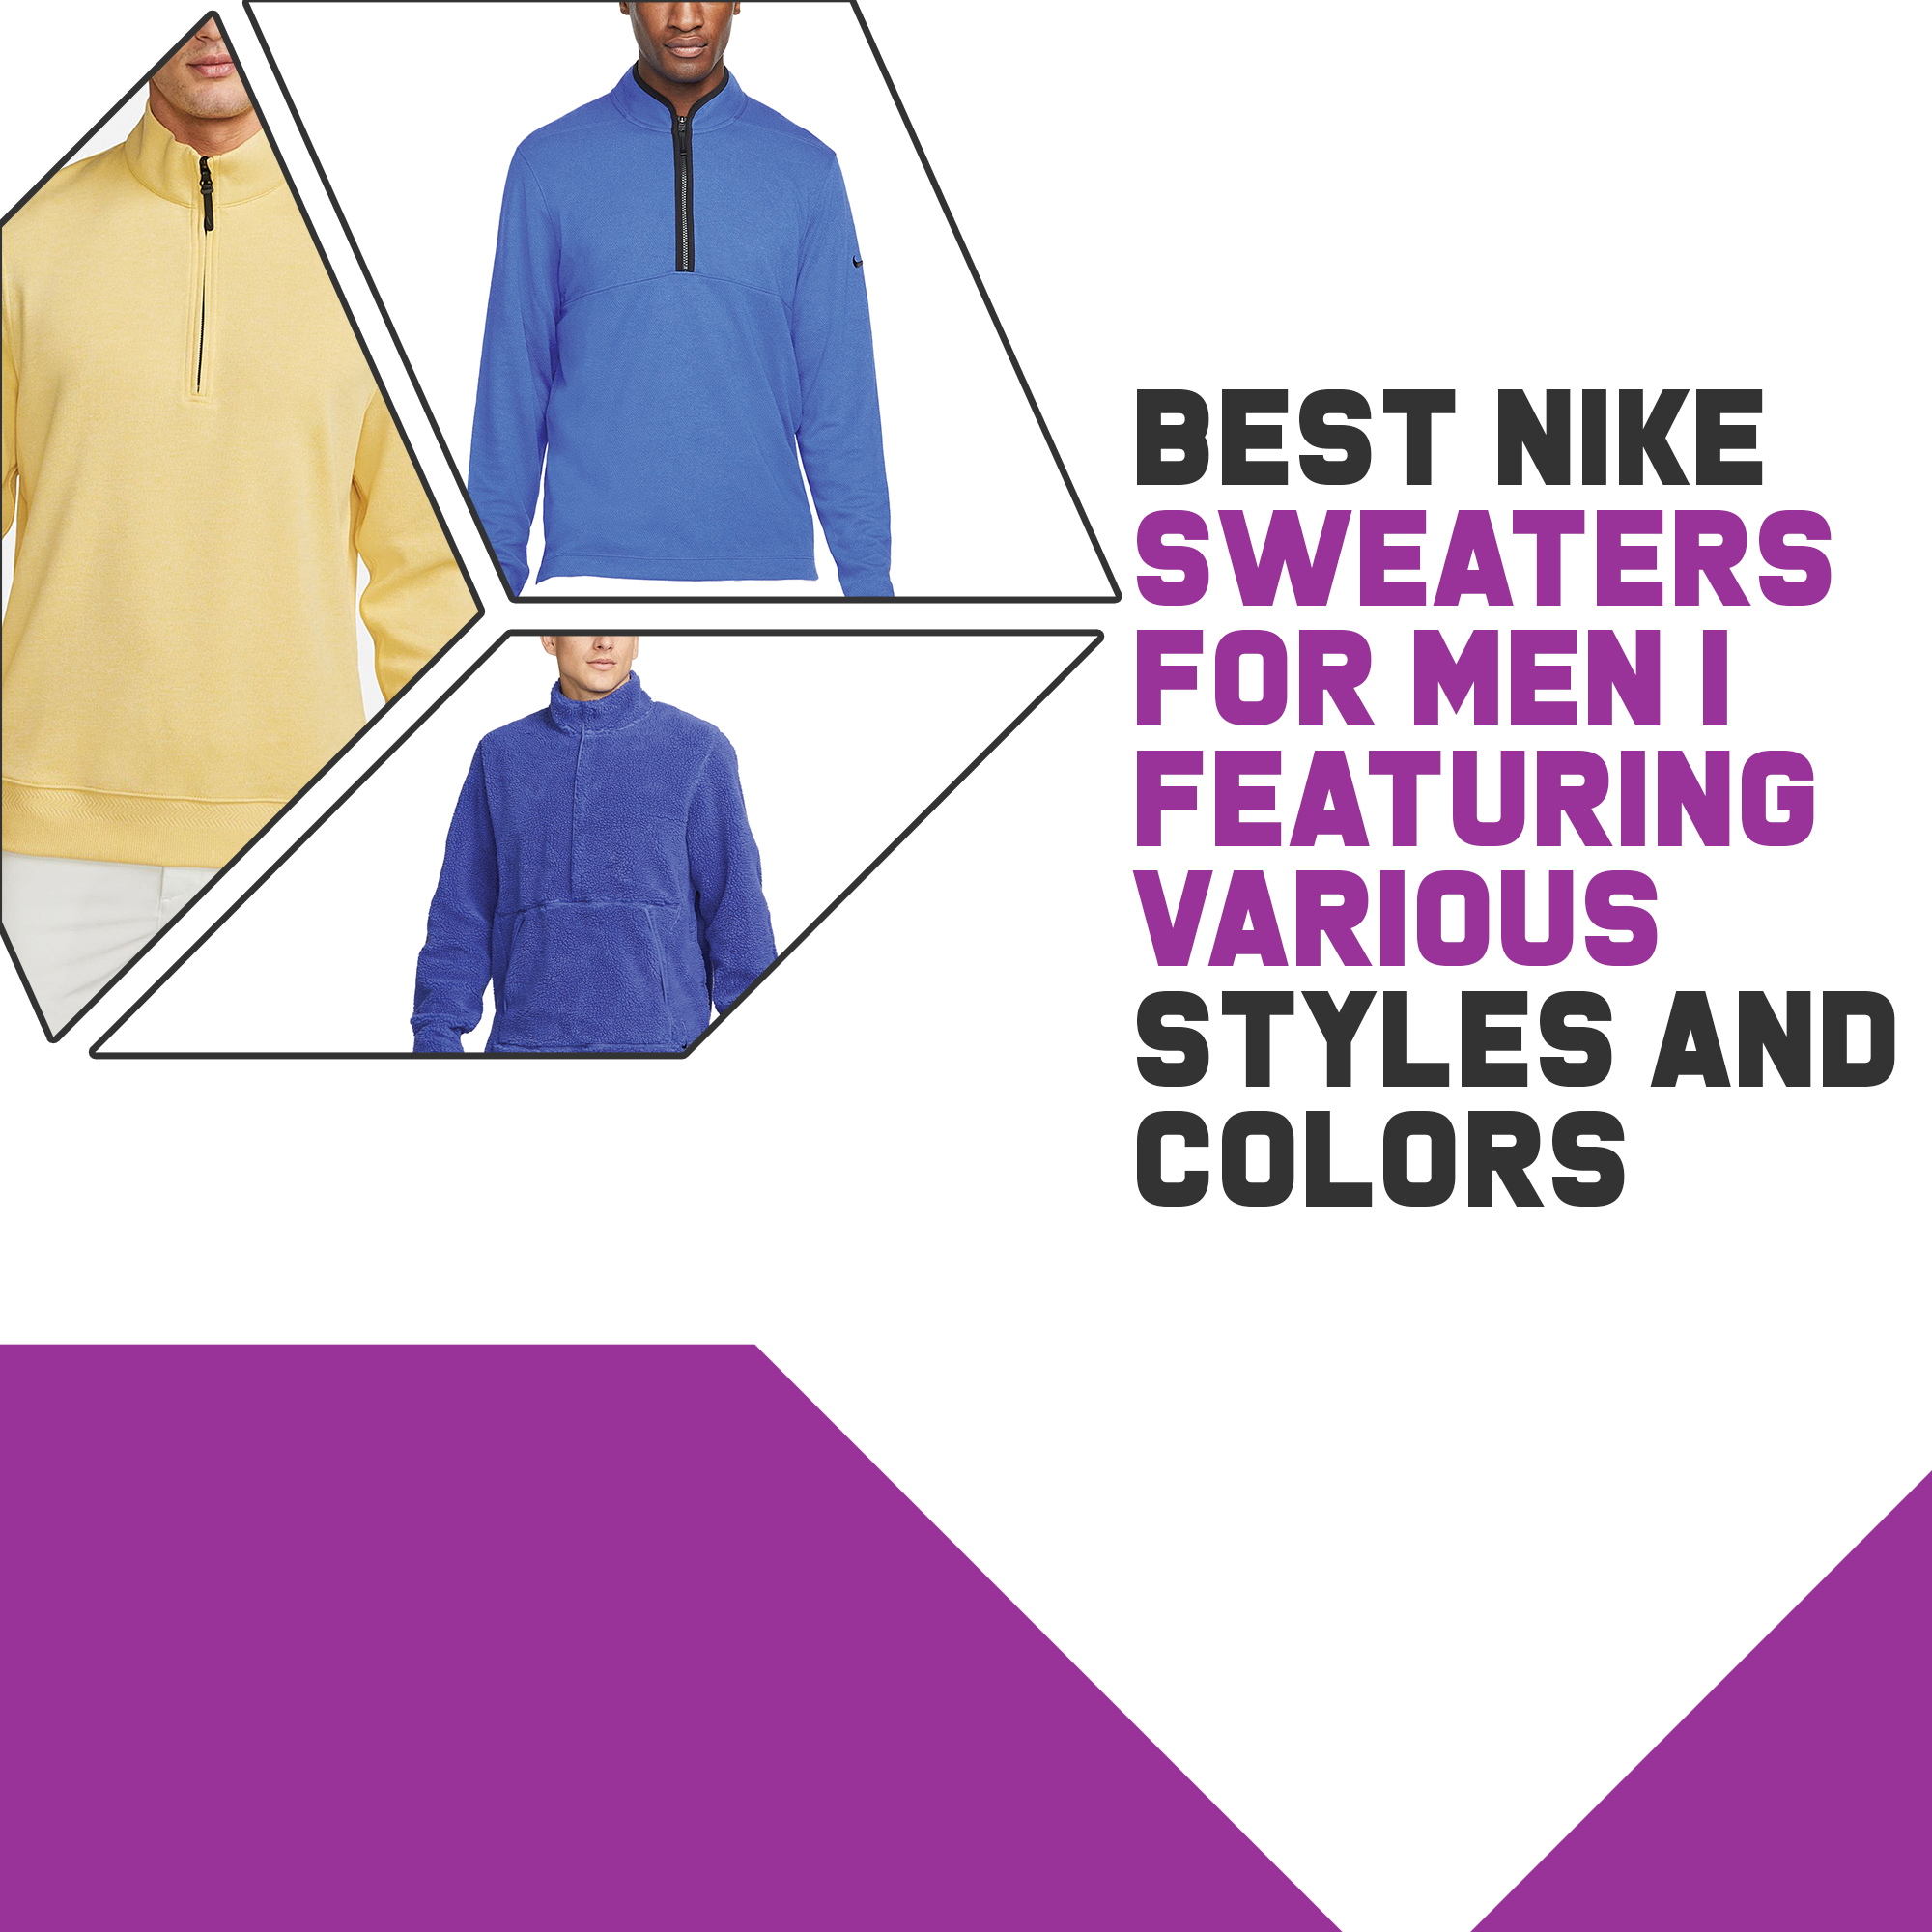 Best Nike Sweaters For Men | Featuring Various Styles and Colors